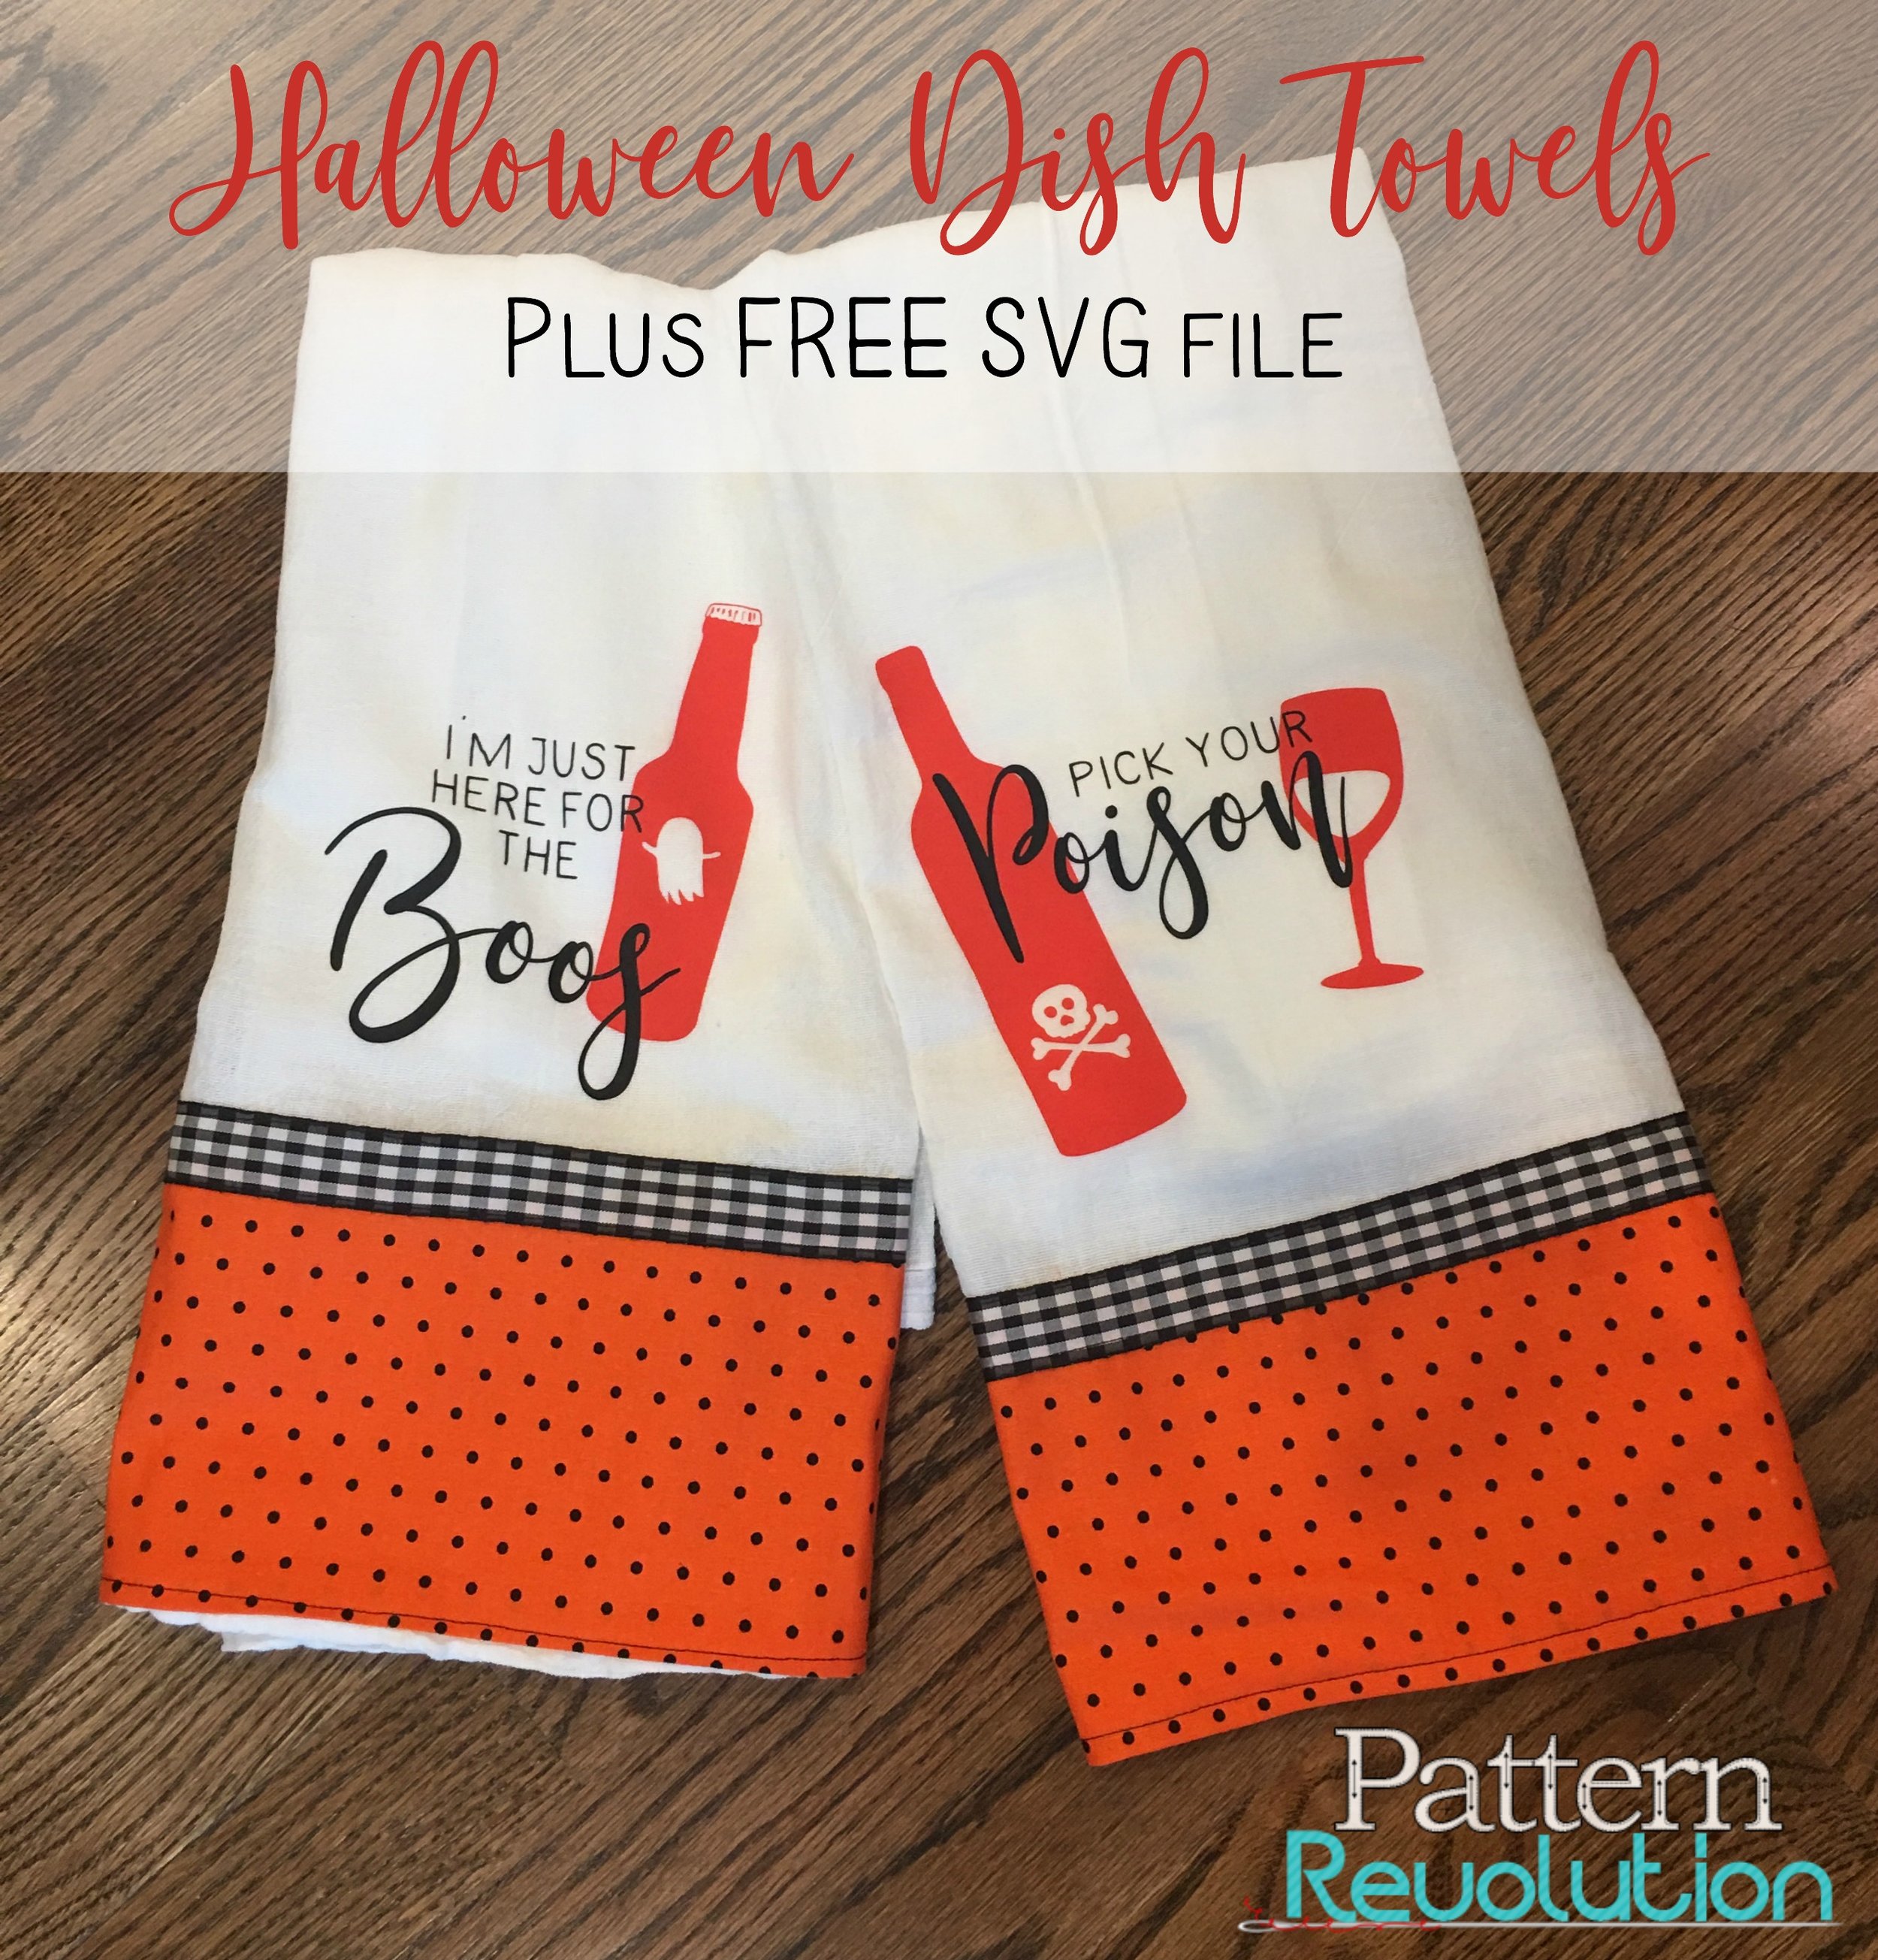 How To Use The Cricut Easy Press and Free Books SVG for Library Bag - Coral  + Co.